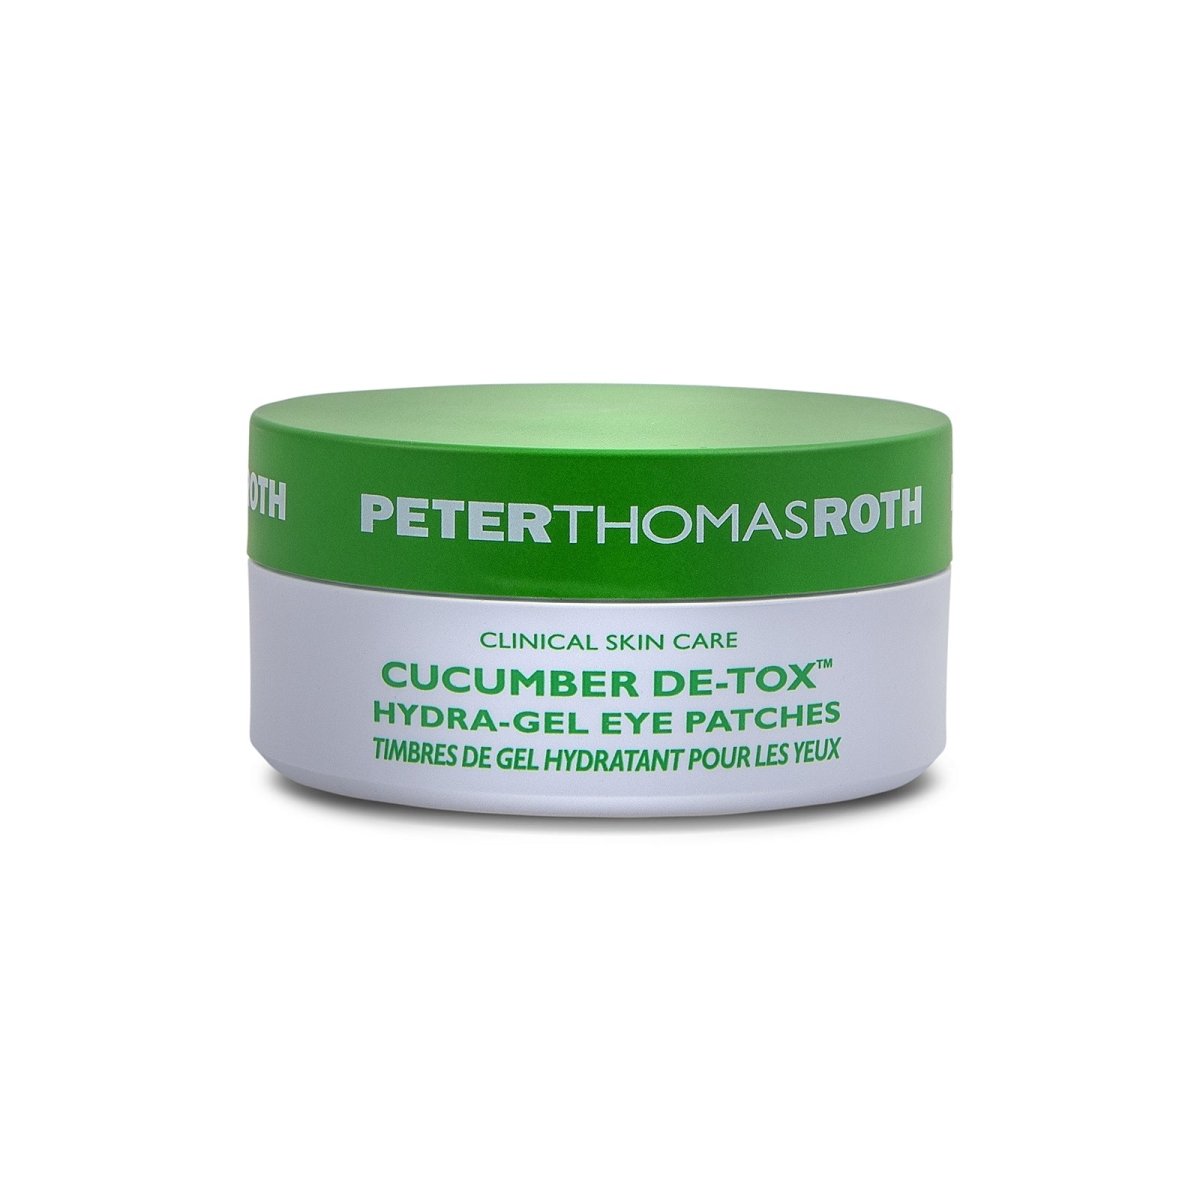 Cucumber De-Tox Hydra-Gel Eye Patches by Peter Thomas Roth for Unisex - 60 Pc Patches - image 1 of 3